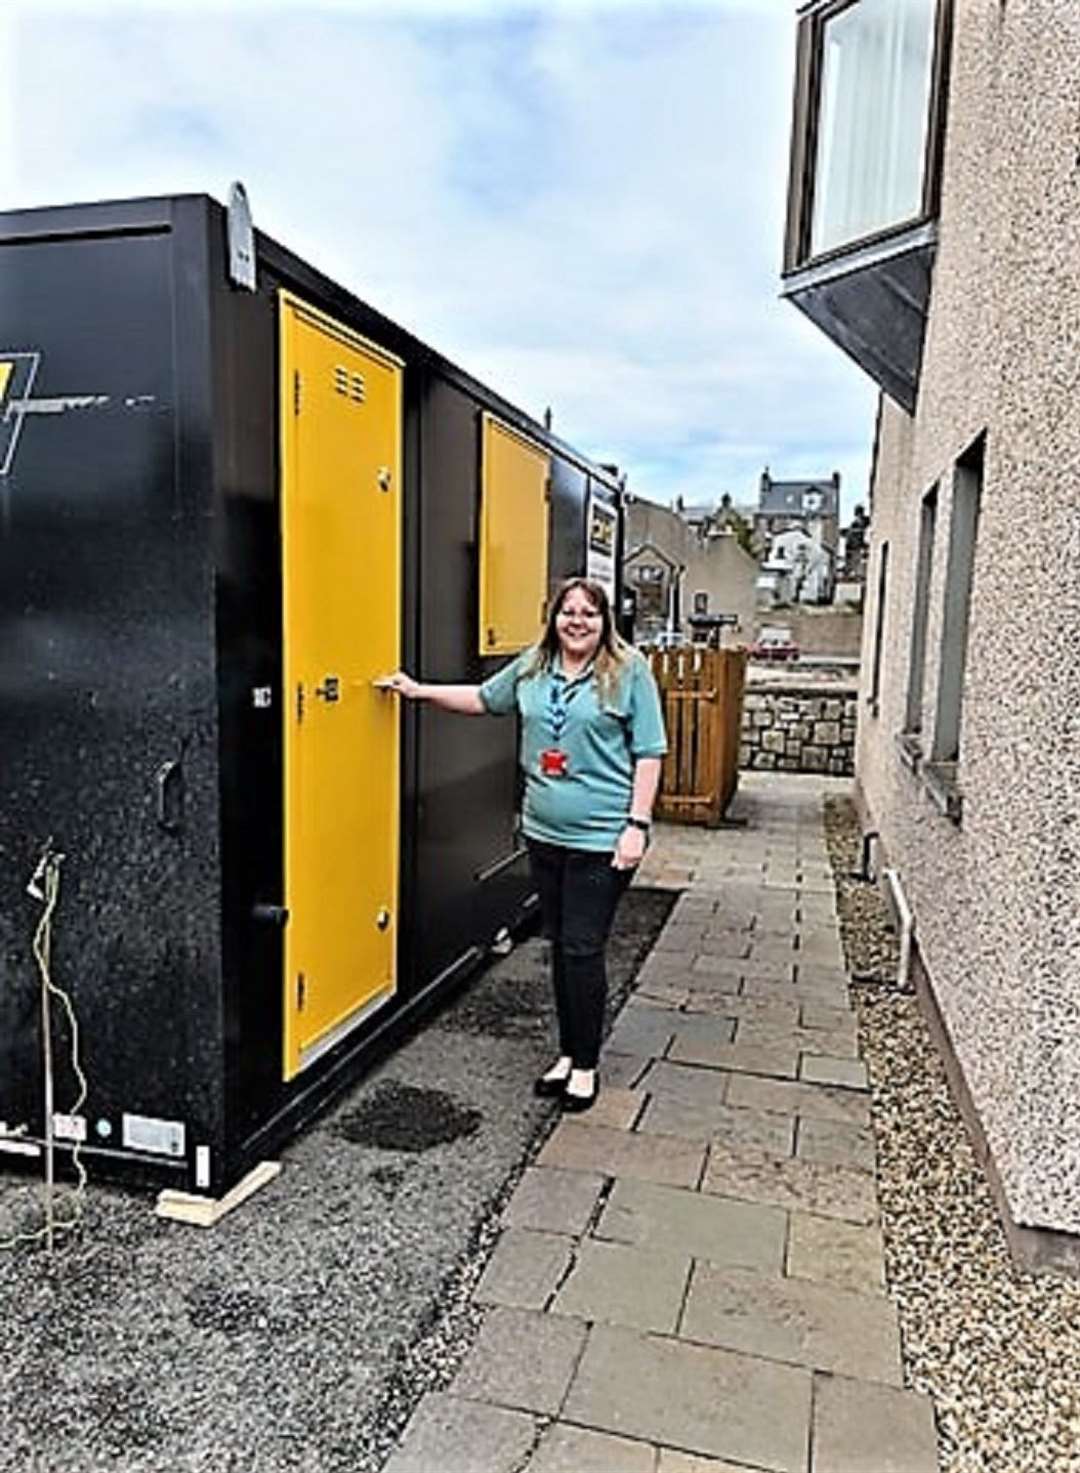 A portable unit was situated outside the medical centre in Wick.